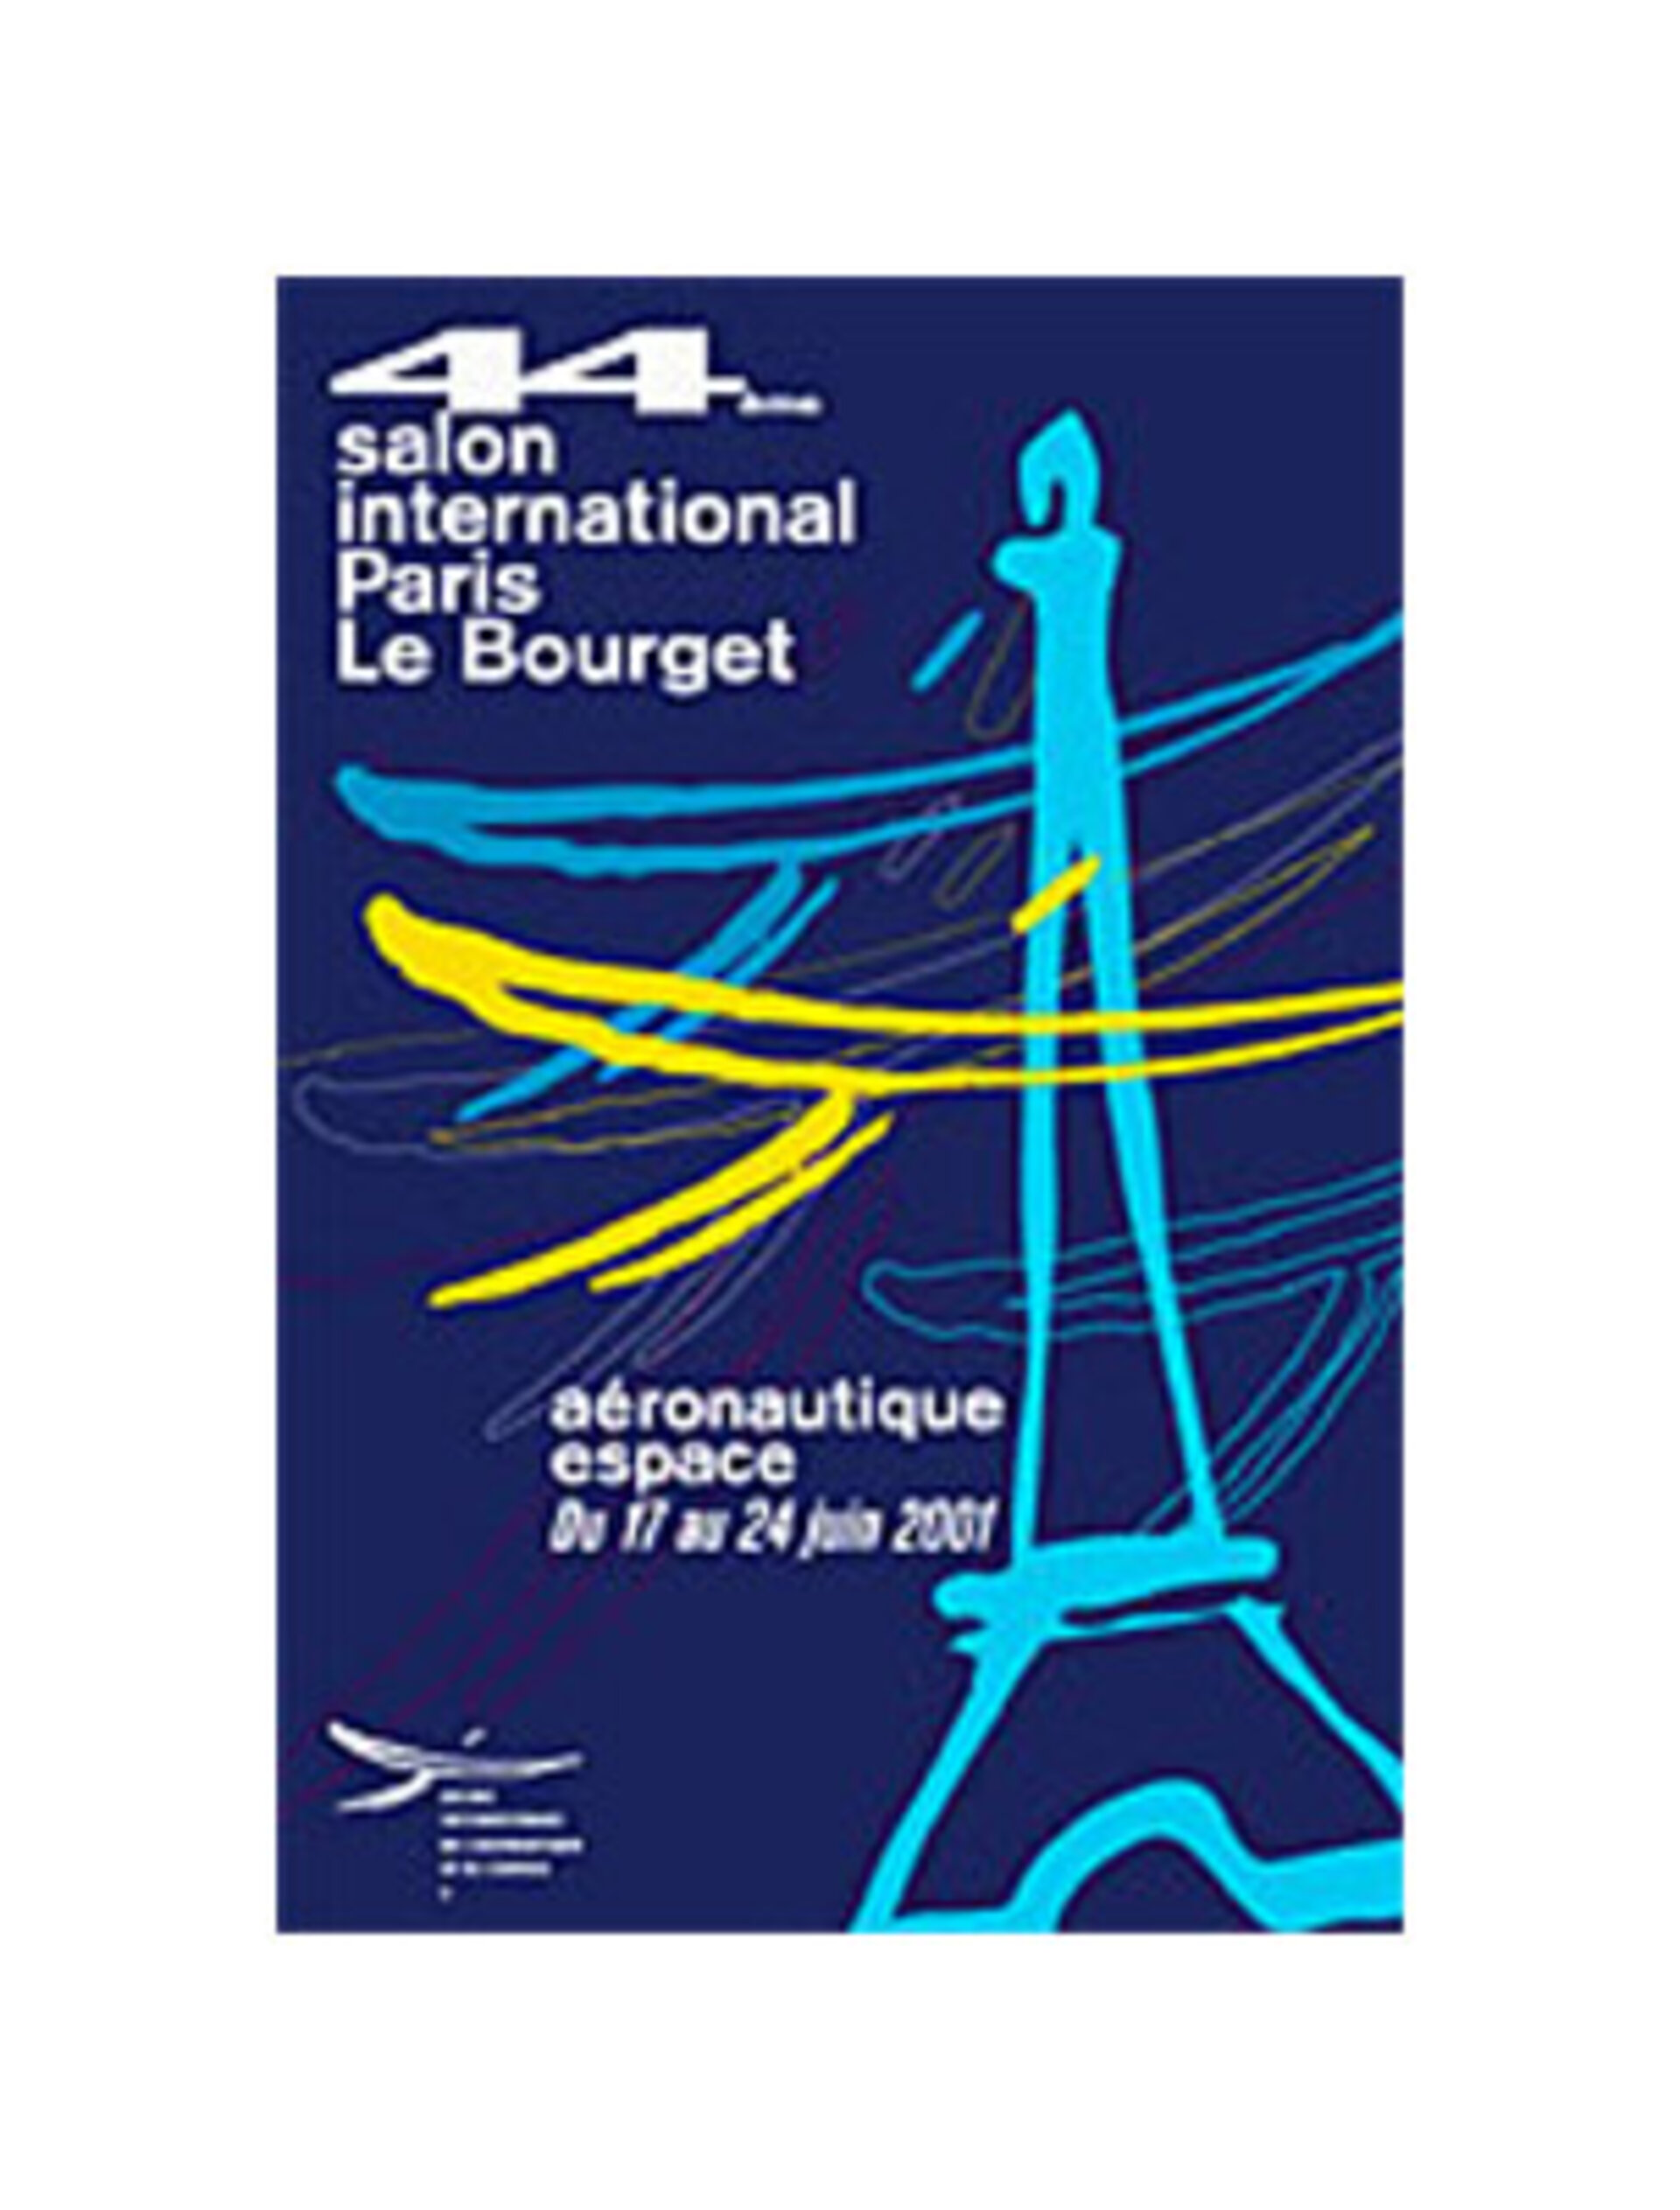 Le Bourget 2001 Poster